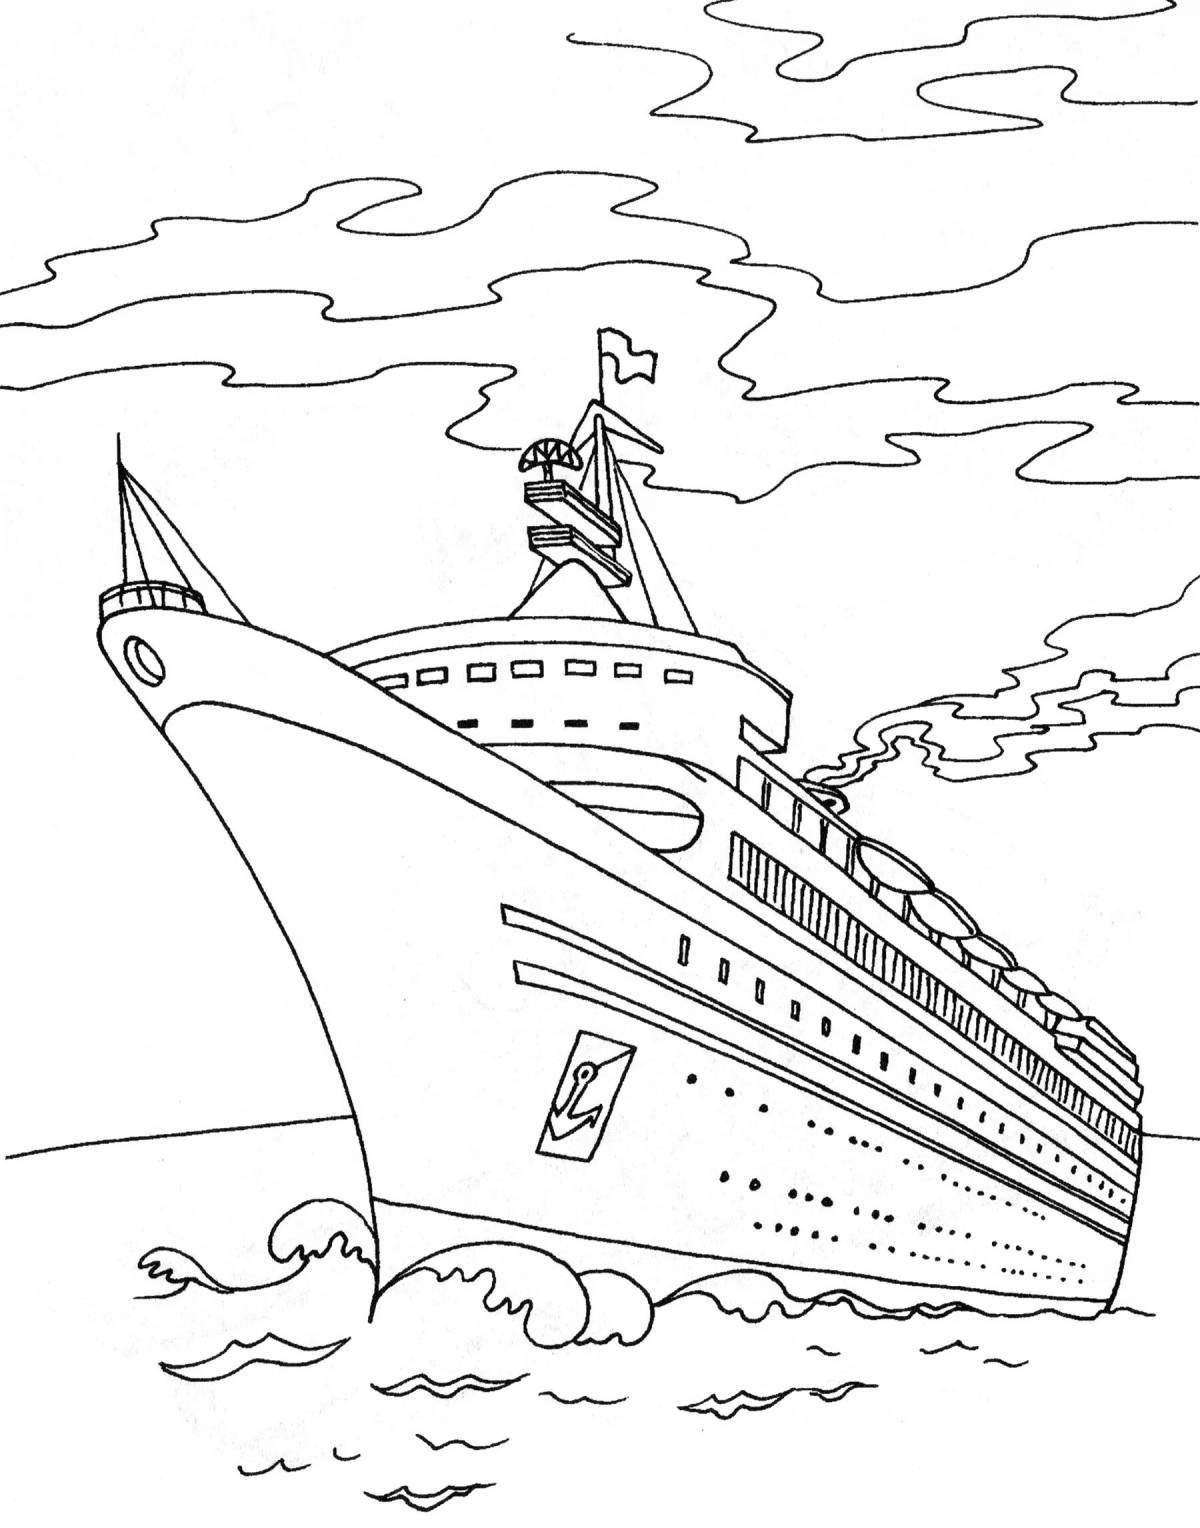 Innovative icebreaker coloring page